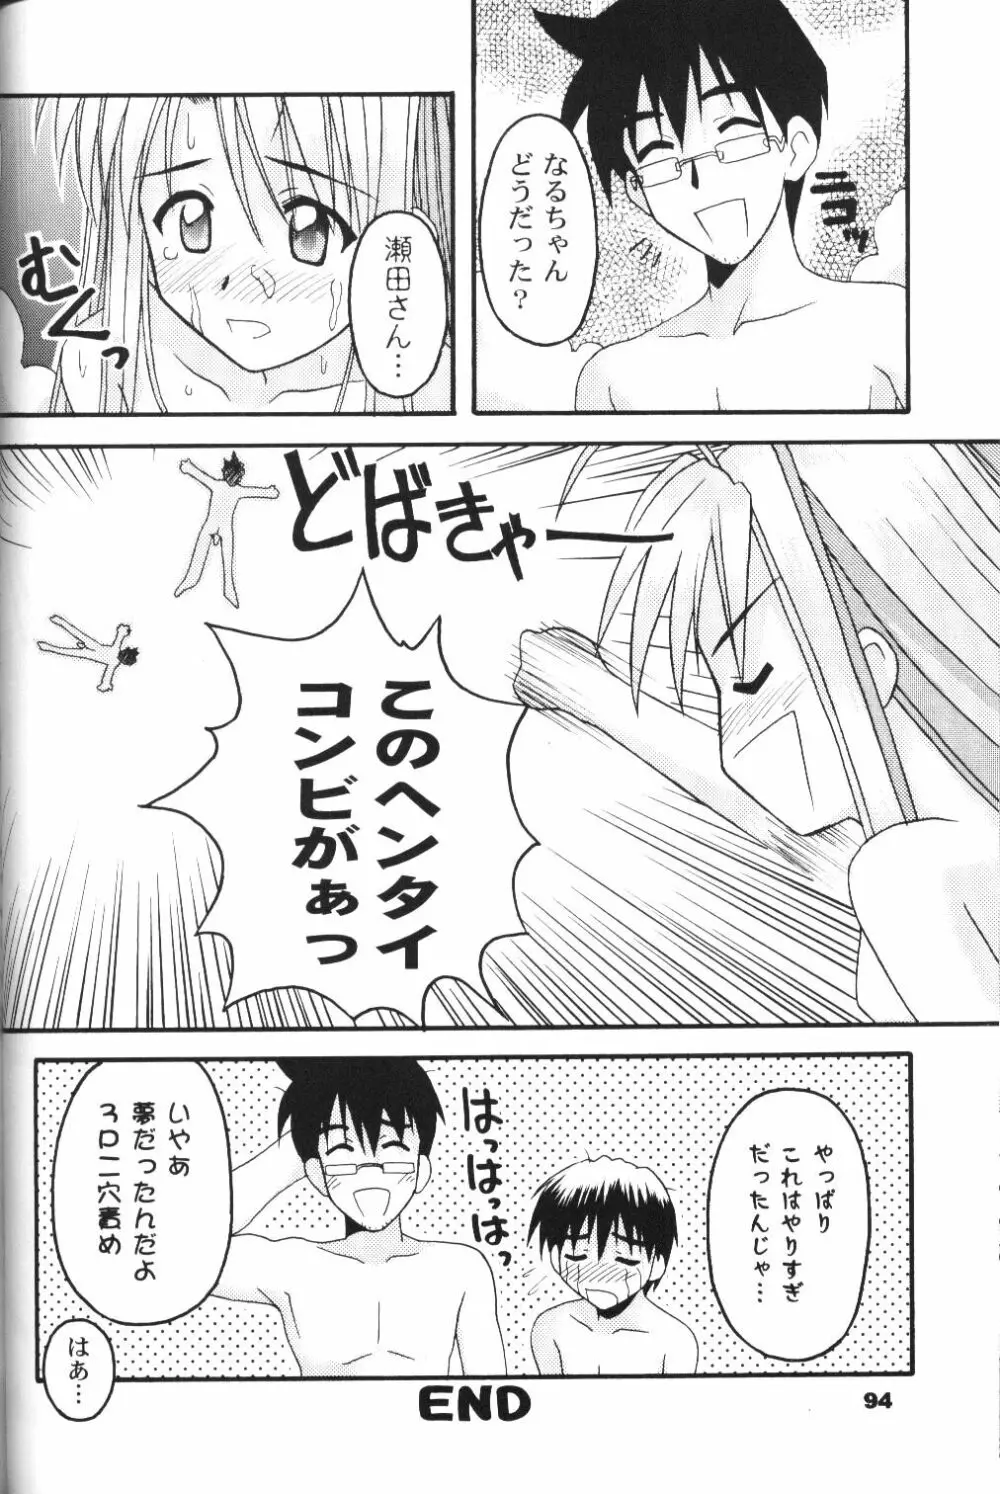 save Page.93